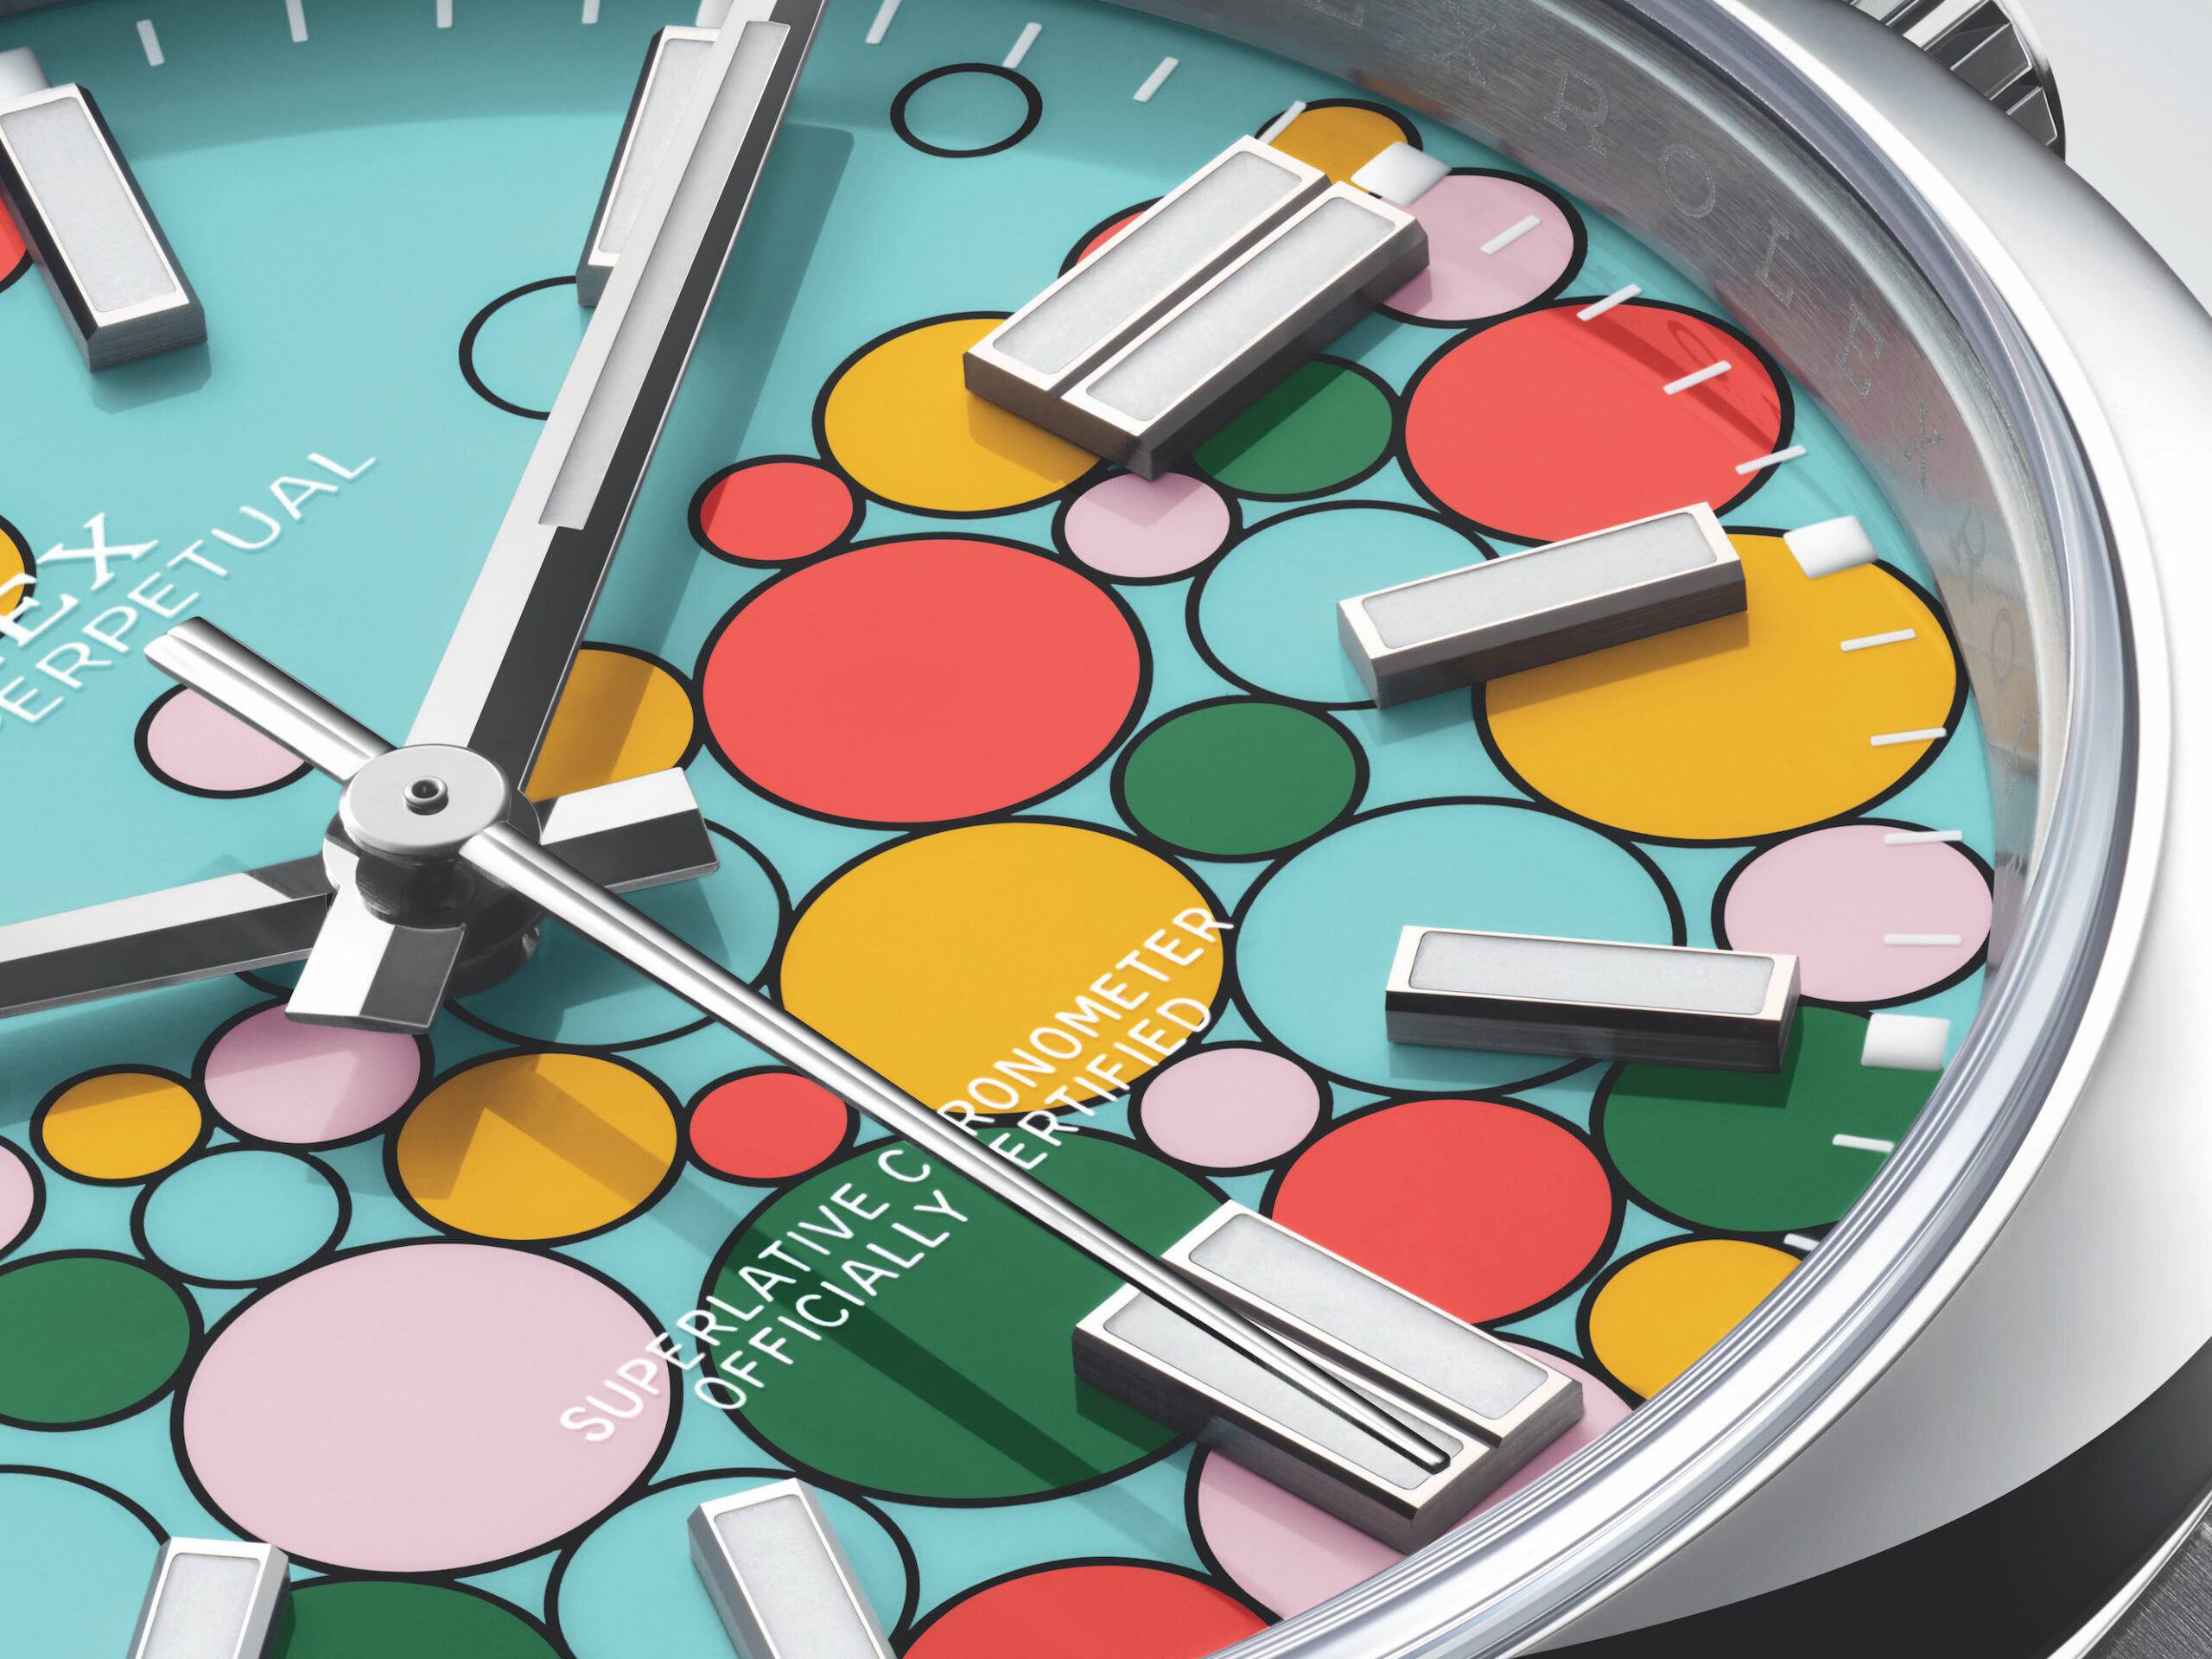 Rolex Releases New Oyster Perpetual Watches With 'Celebration' Dials aBlogtoWatch